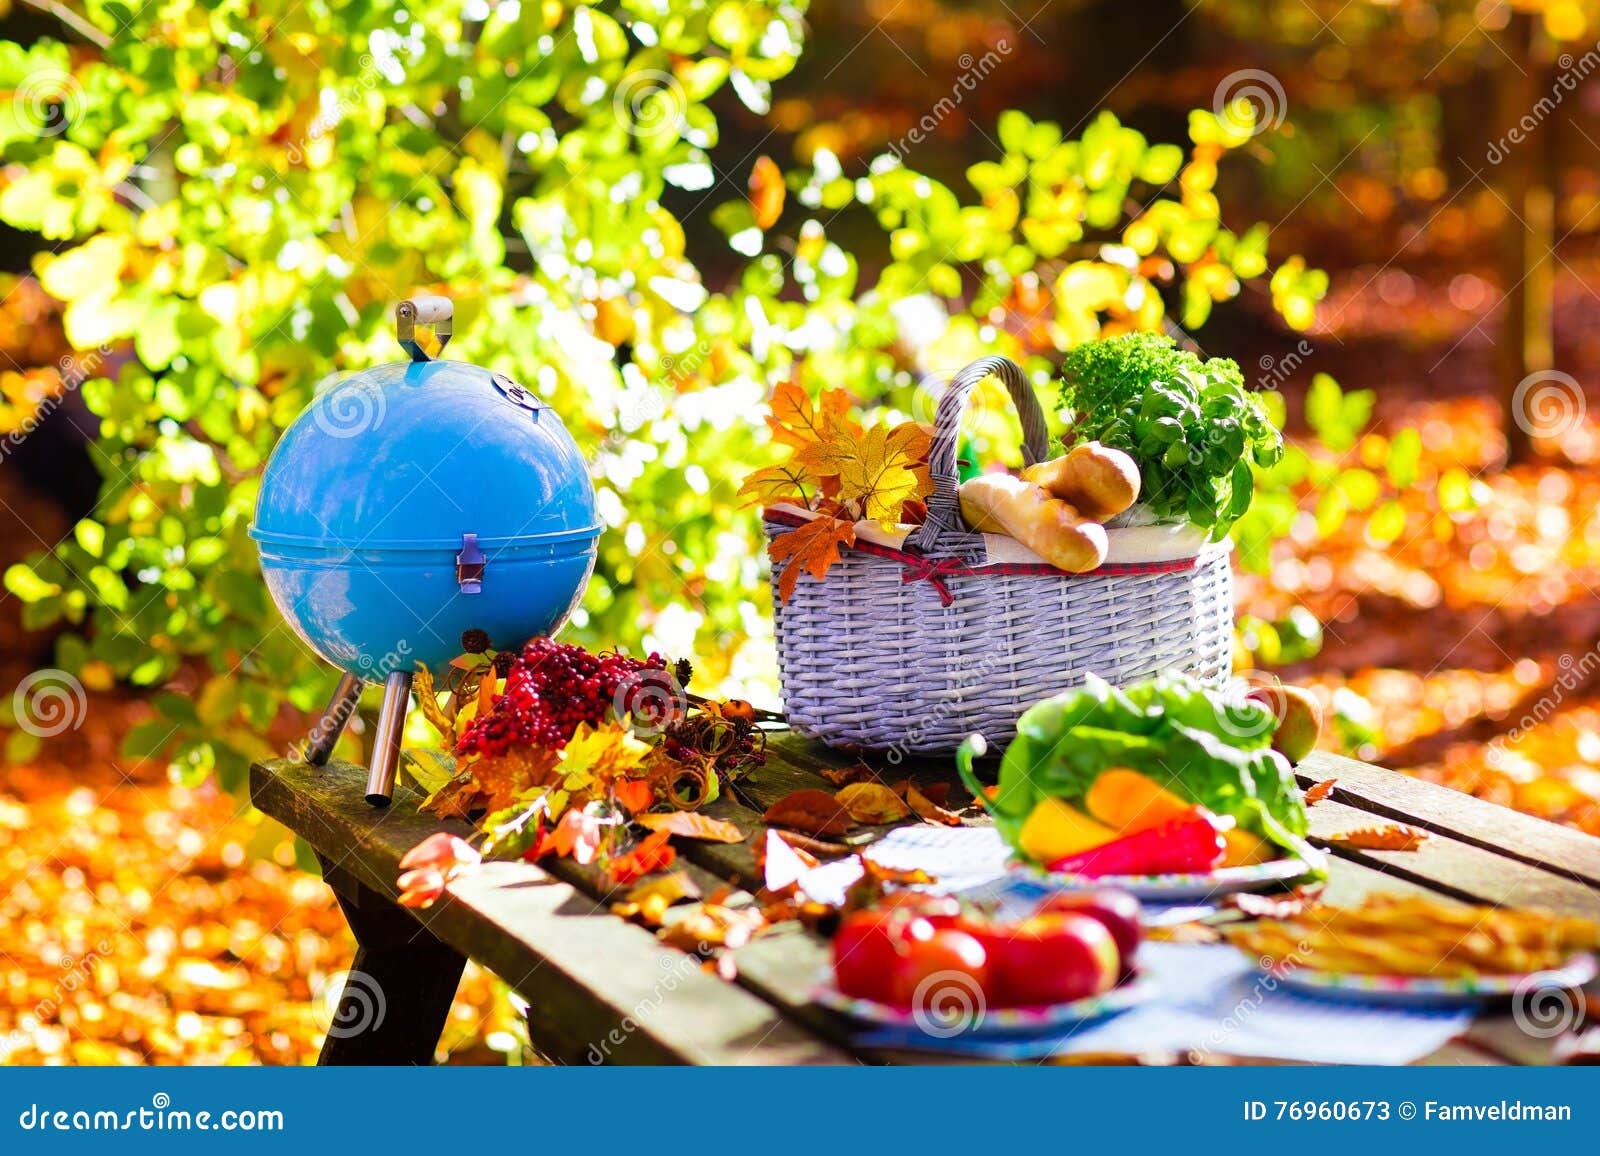 Grill And Picnic Basket In Autumn Garden Stock Image 